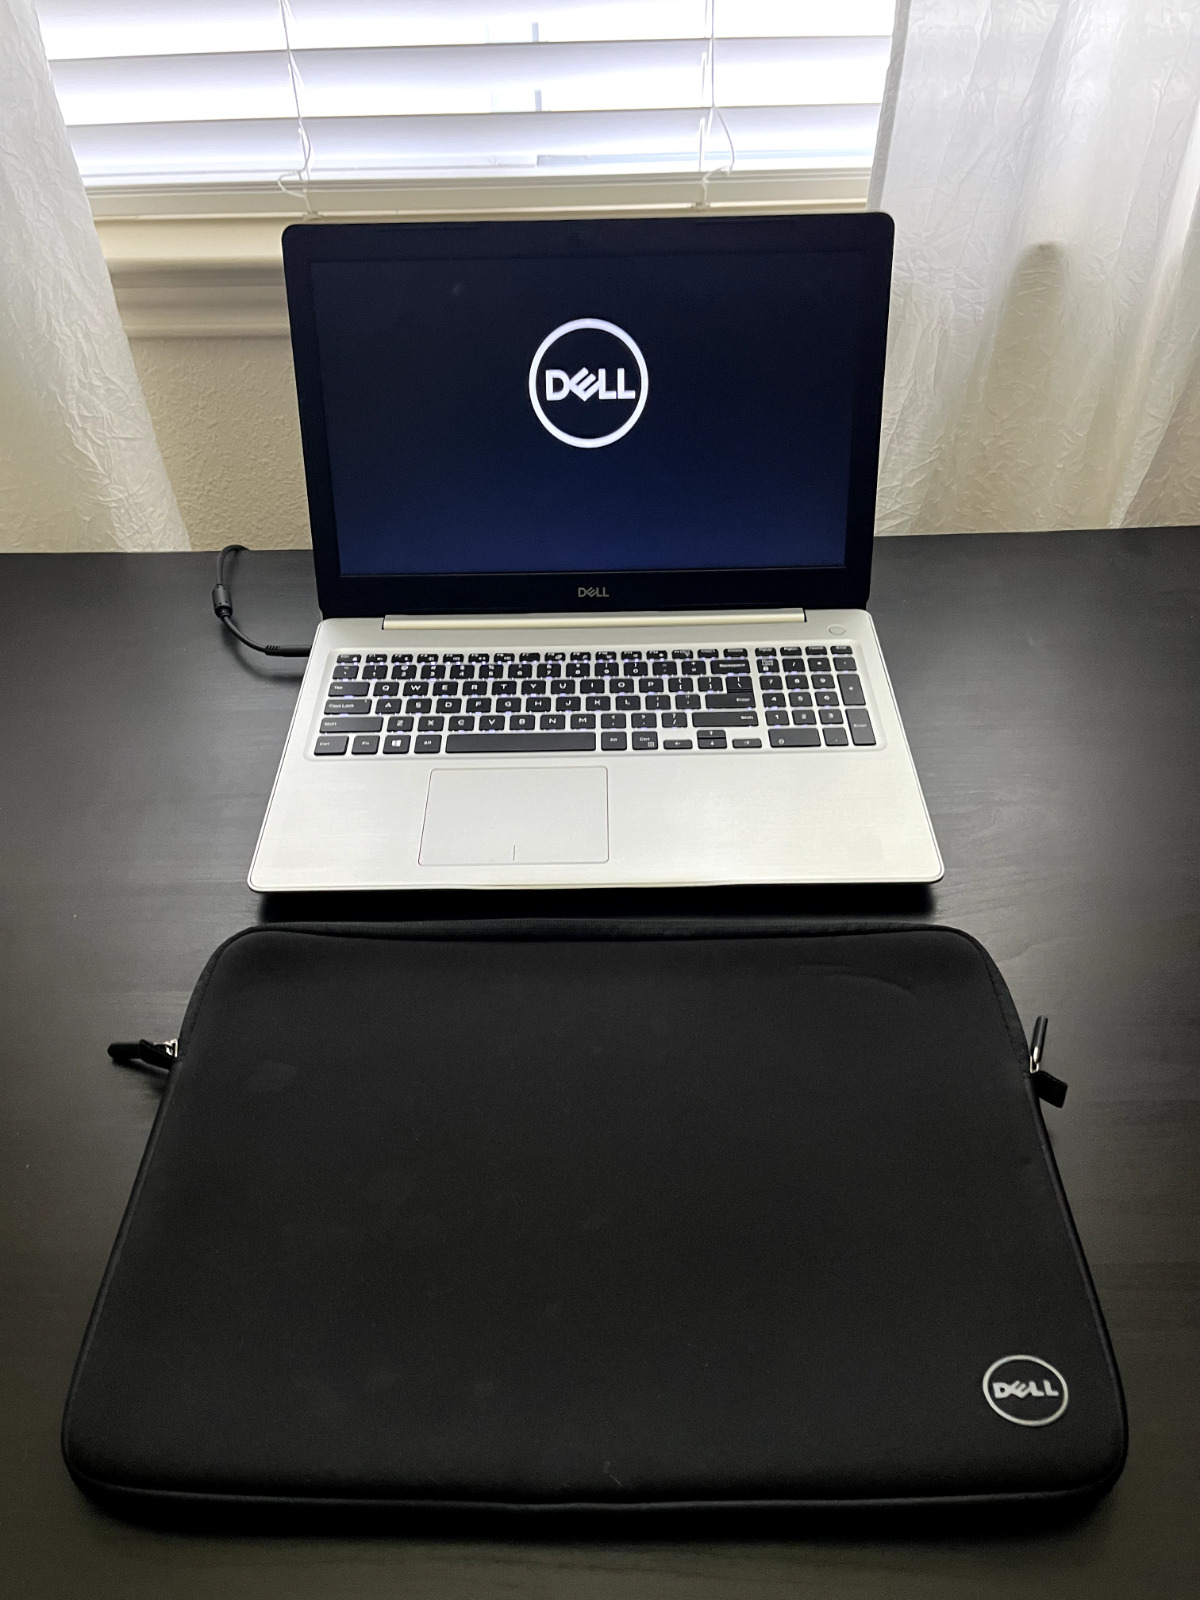 USED -Dell Inspiron 5570- 15.6 inch, Intel Core i5, 16 GB Ram Laptop w/ Sleeve